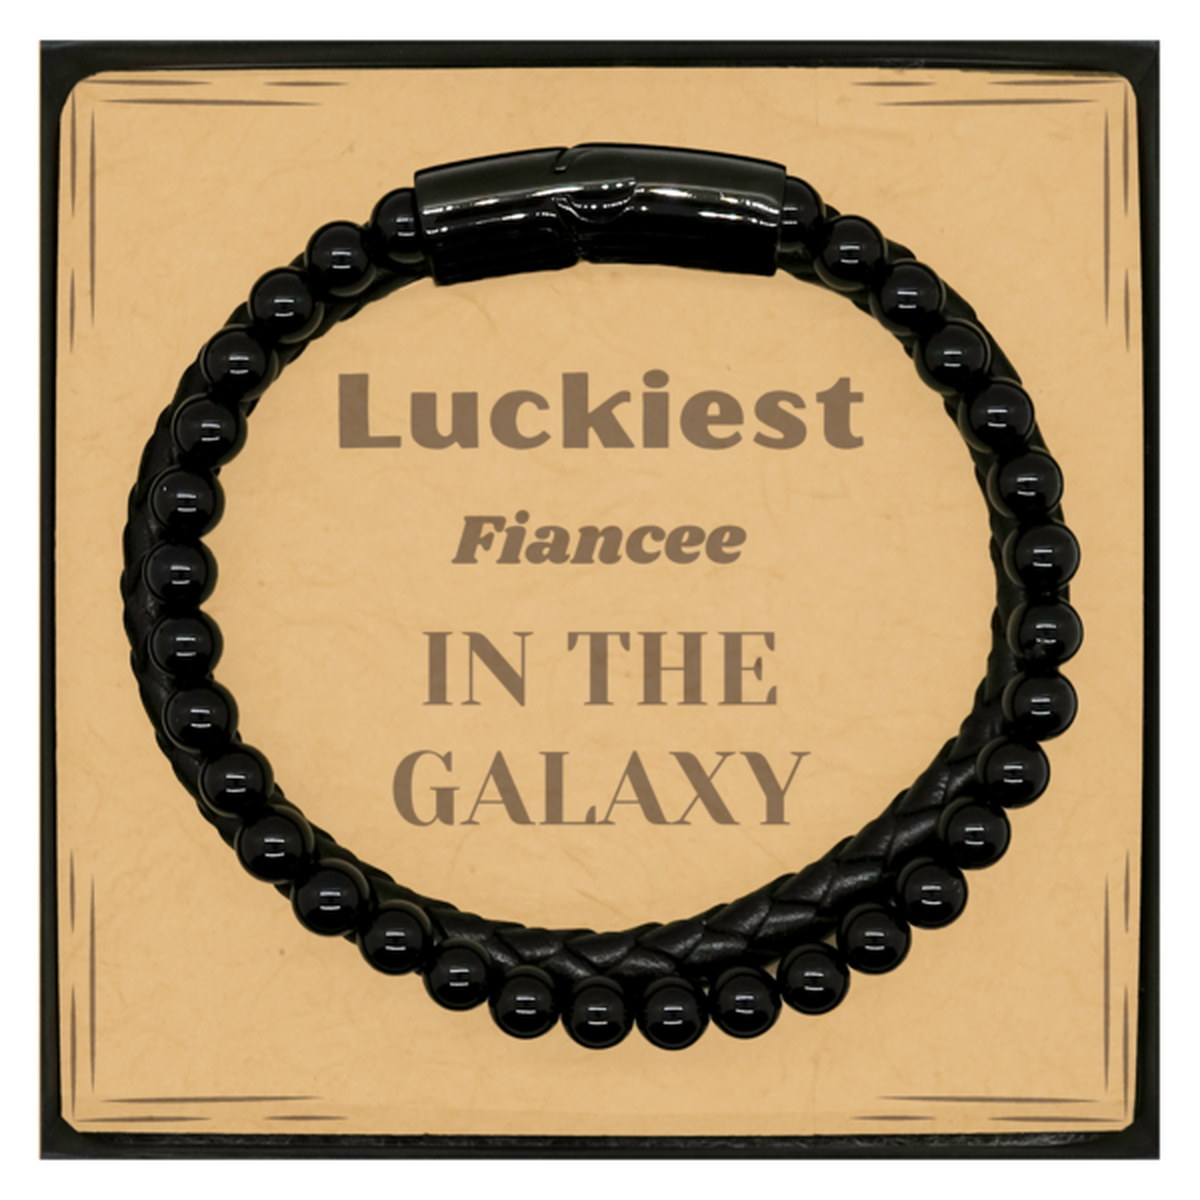 Luckiest Fiancee in the Galaxy, To My Fiancee Message Card Gifts, Christmas Fiancee Stone Leather Bracelets Gifts, X-mas Birthday Unique Gifts For Fiancee Men Women